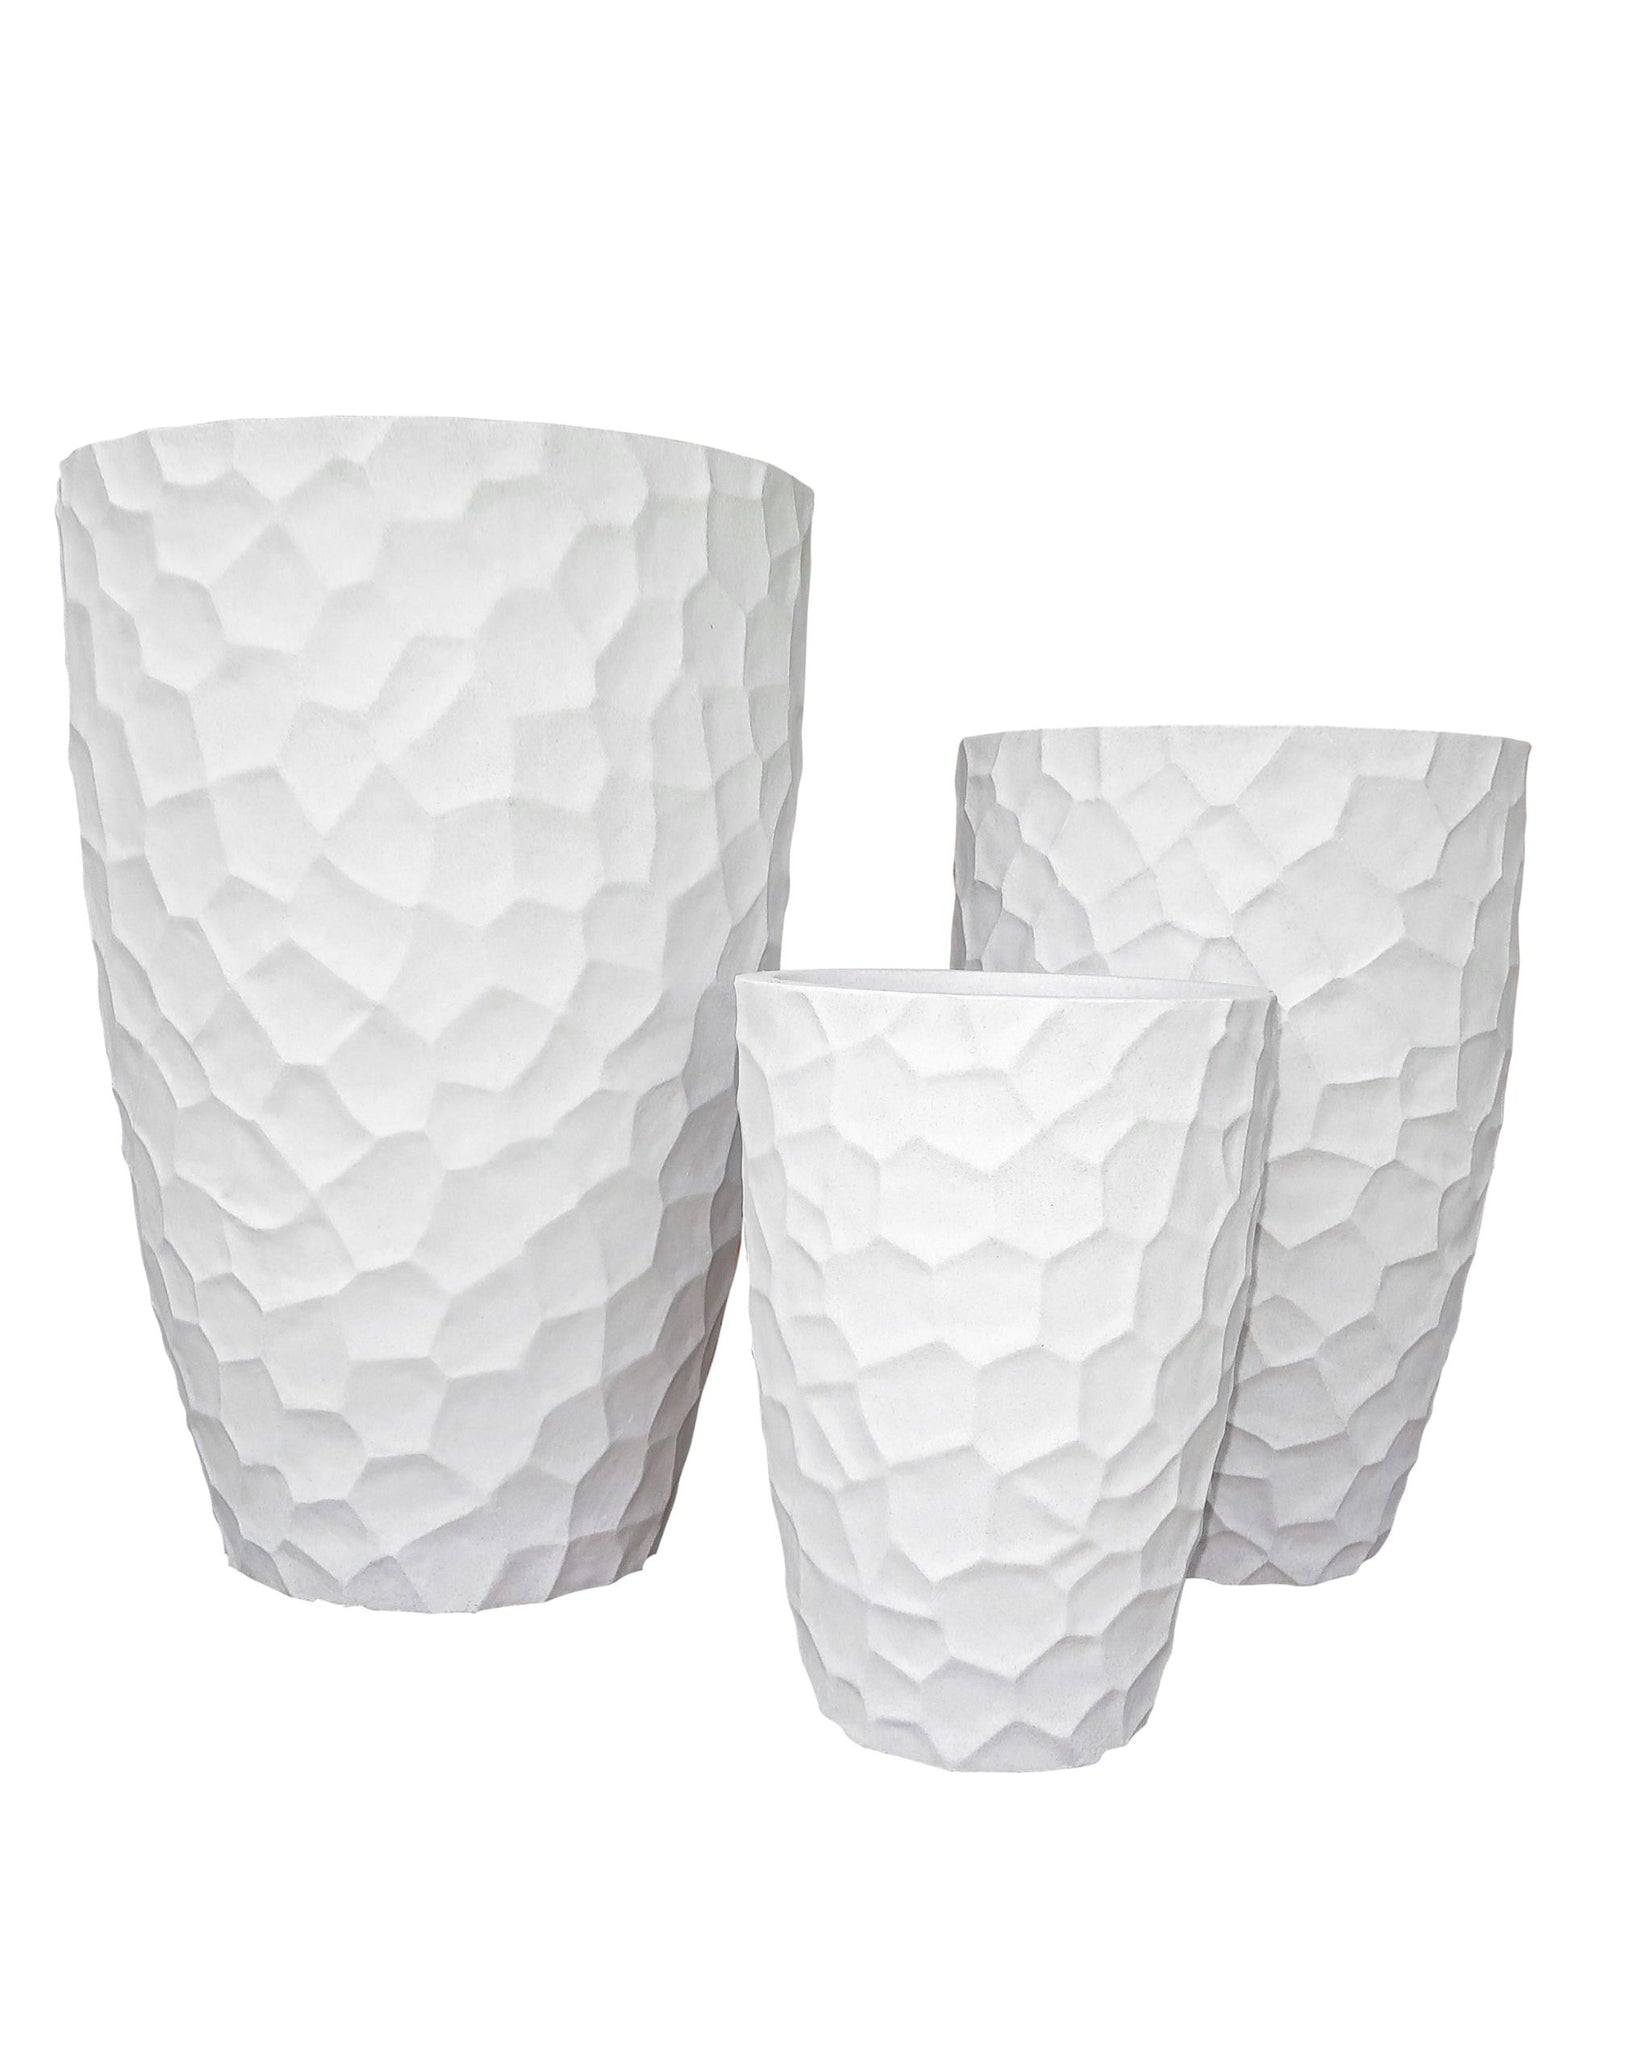 Set of 3 different sized round upright Planters, with a Trendy Unique Patterned finish. Statement Planters that are Lightweight. Colour off-white.